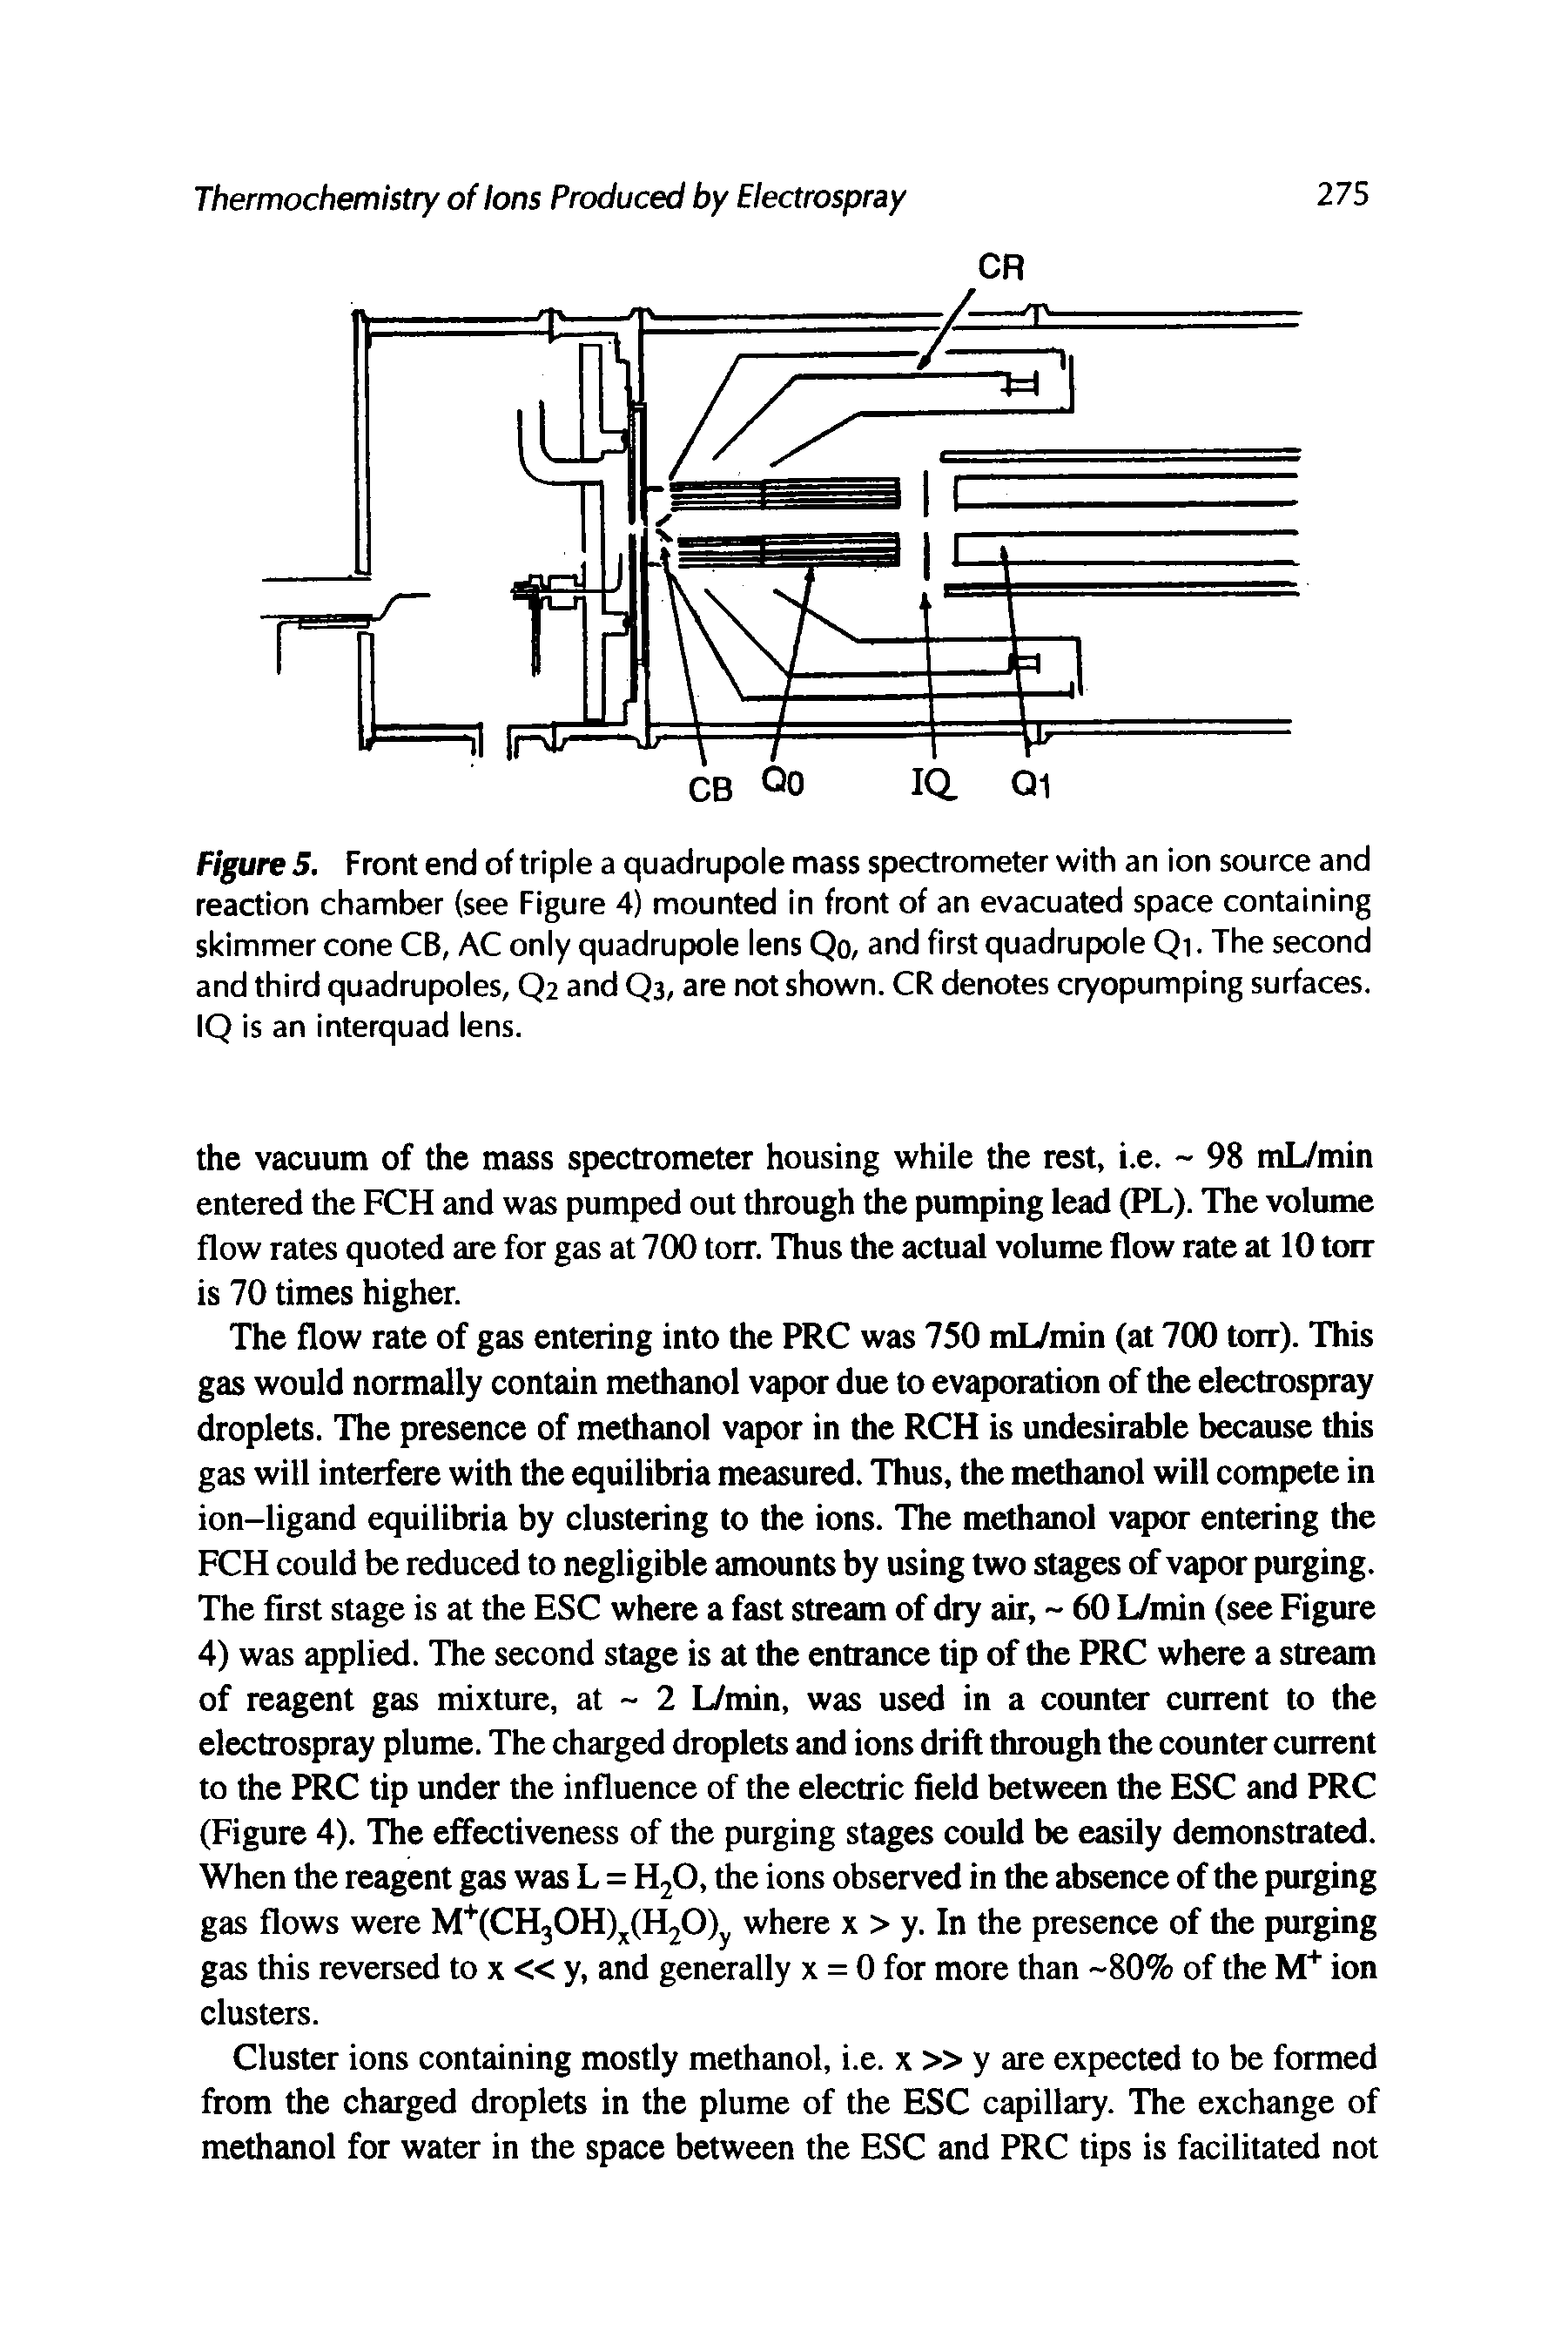 Figure 5. Front end of triple a quadrupole mass spectrometer with an ion source and reaction chamber (see Figure 4) mounted in front of an evacuated space containing skimmer cone CB, AC only quadrupole lens Qo, and first quadrupole Qi. The second and third quadrupoles, Q2 and Q3, are not shown. CR denotes cryopumping surfaces. IQ is an interquad lens.